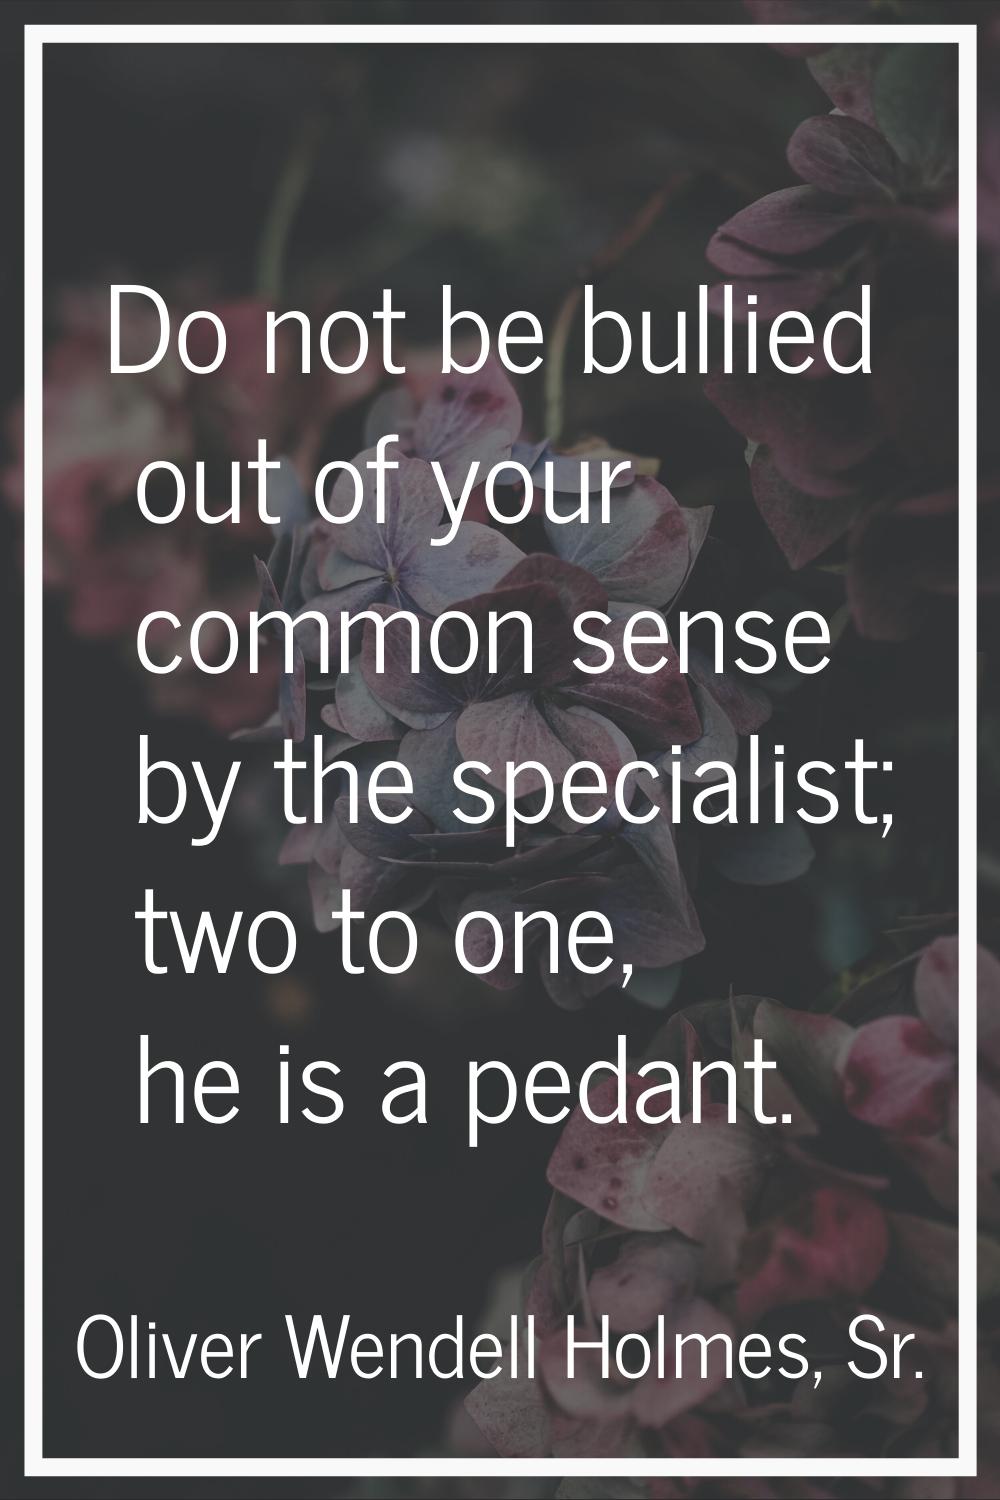 Do not be bullied out of your common sense by the specialist; two to one, he is a pedant.